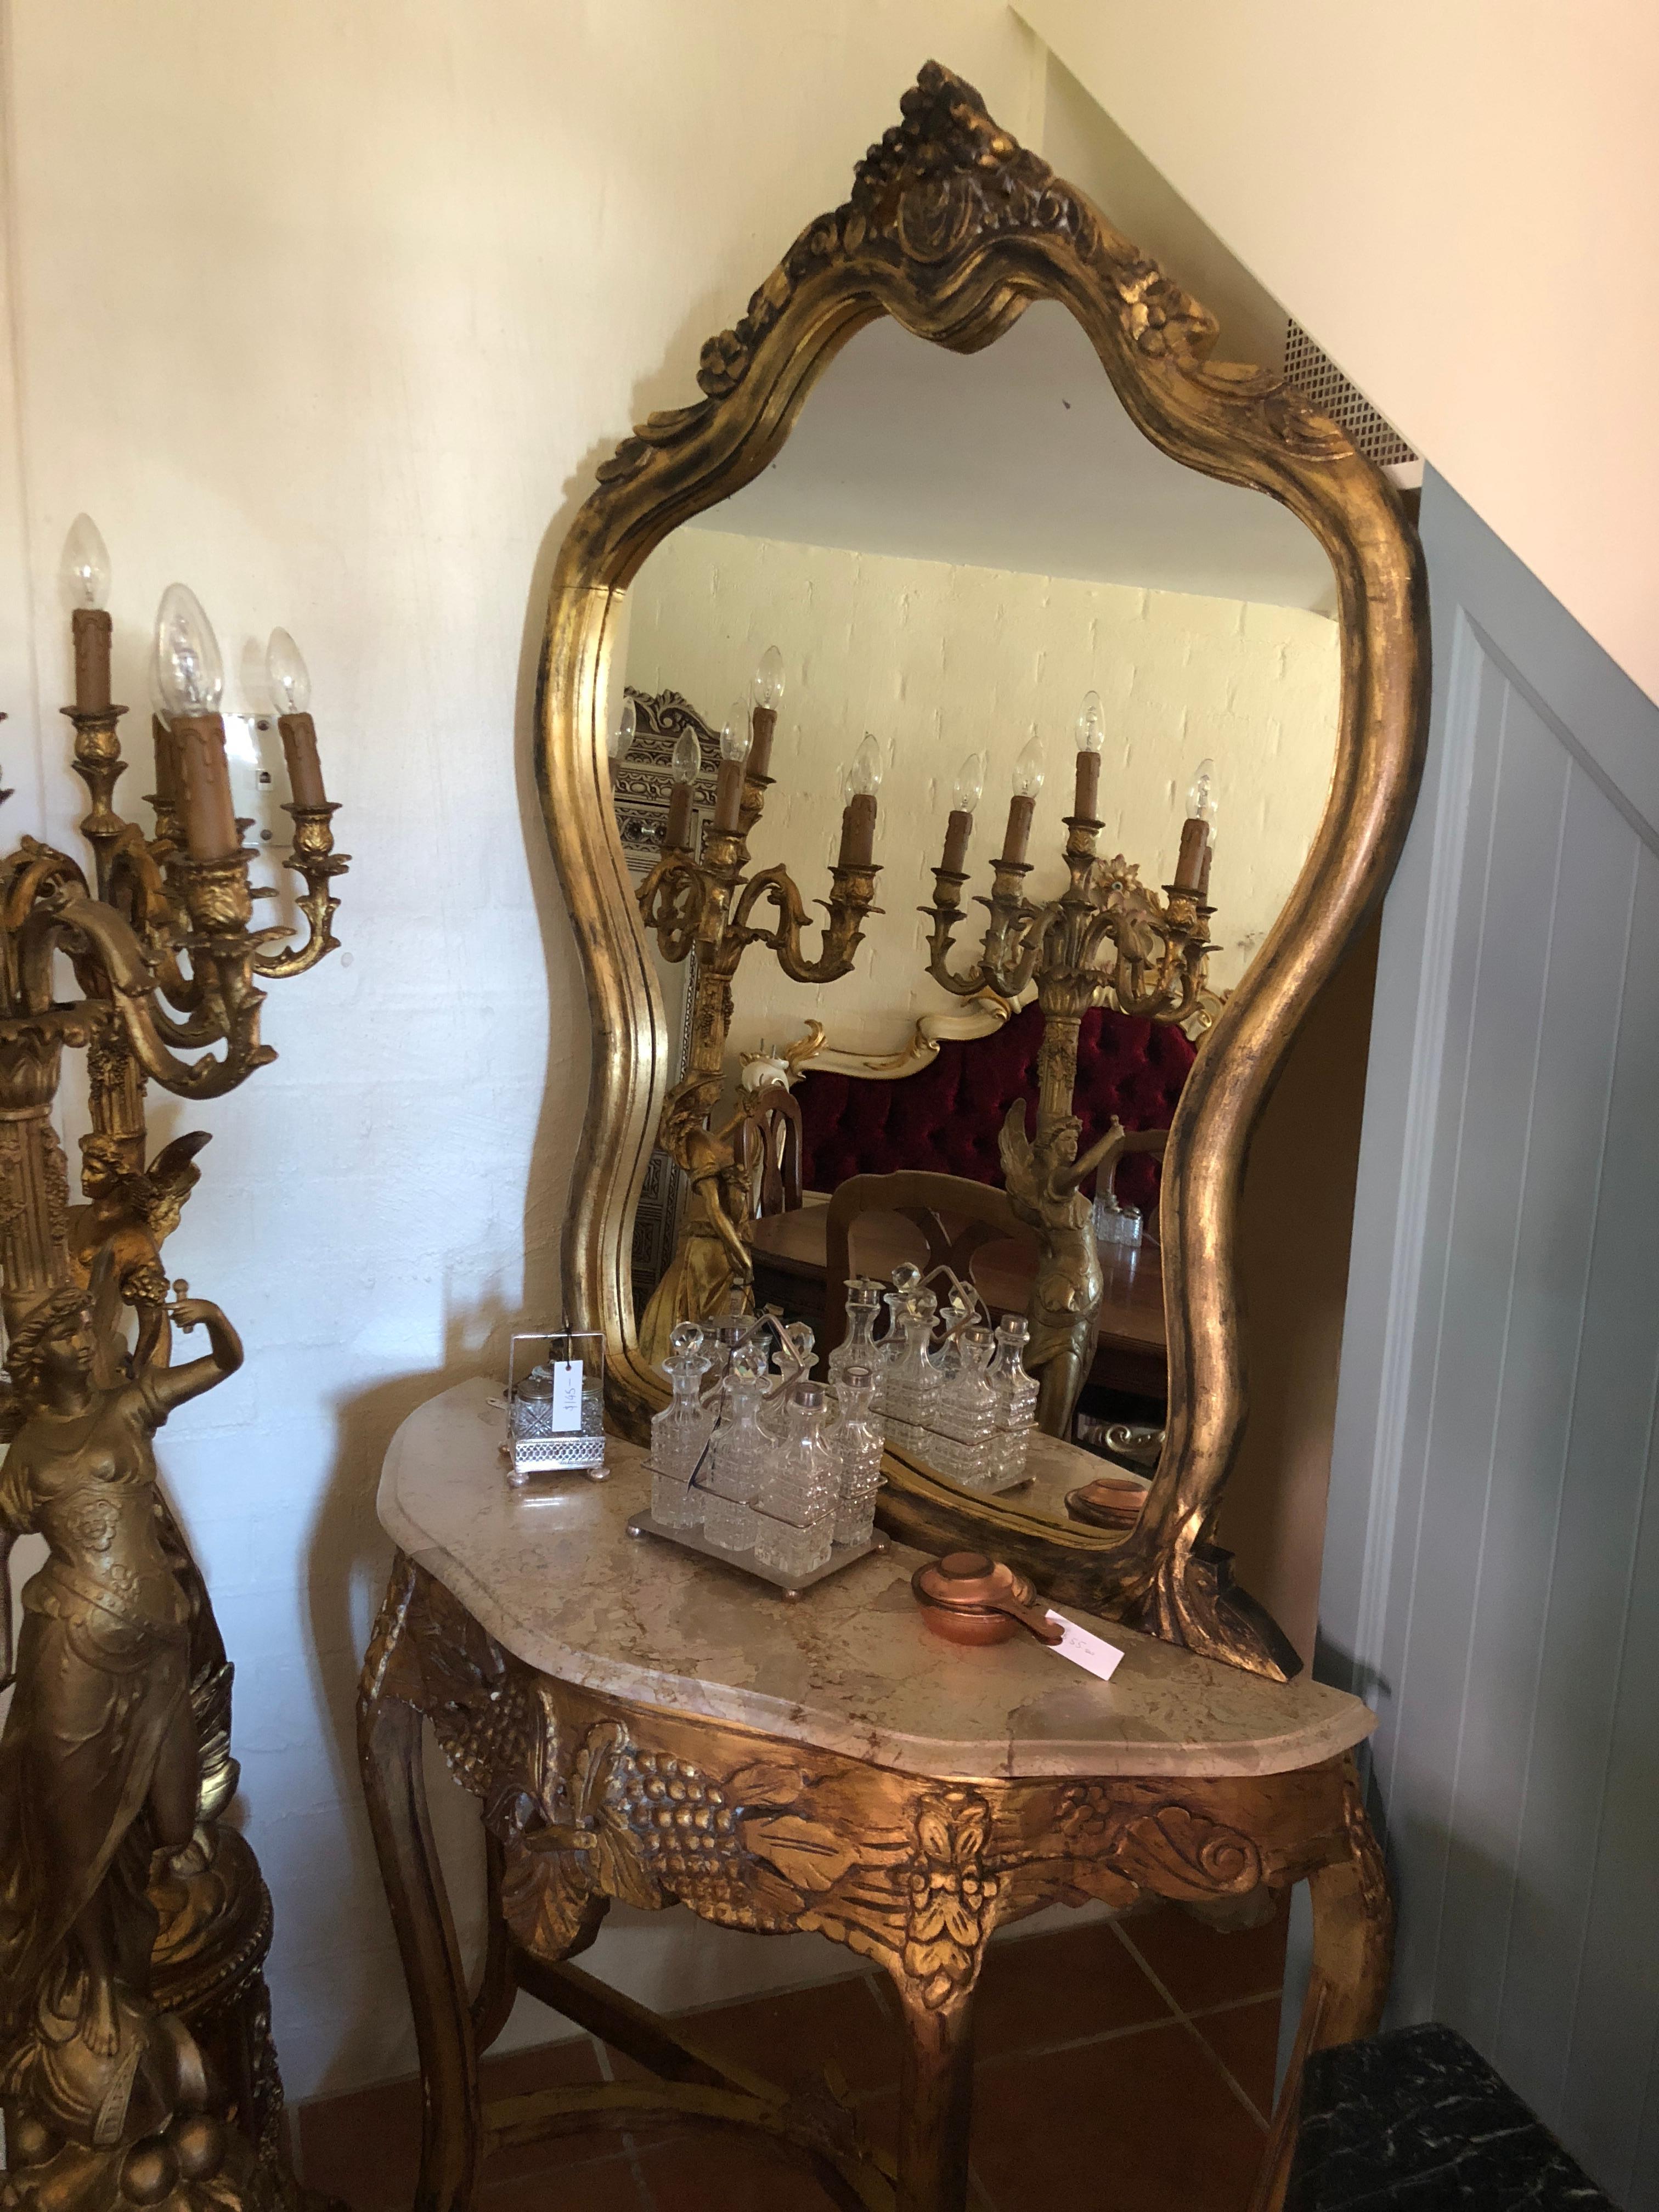 Gilded and adorned with depictions of grape vines, this superb Italian mirrored console would be well suited as a ladies vanity, console or as a mirrored entry hall piece. The elegant shape of the mirror leads down to a creme Italian marble top and